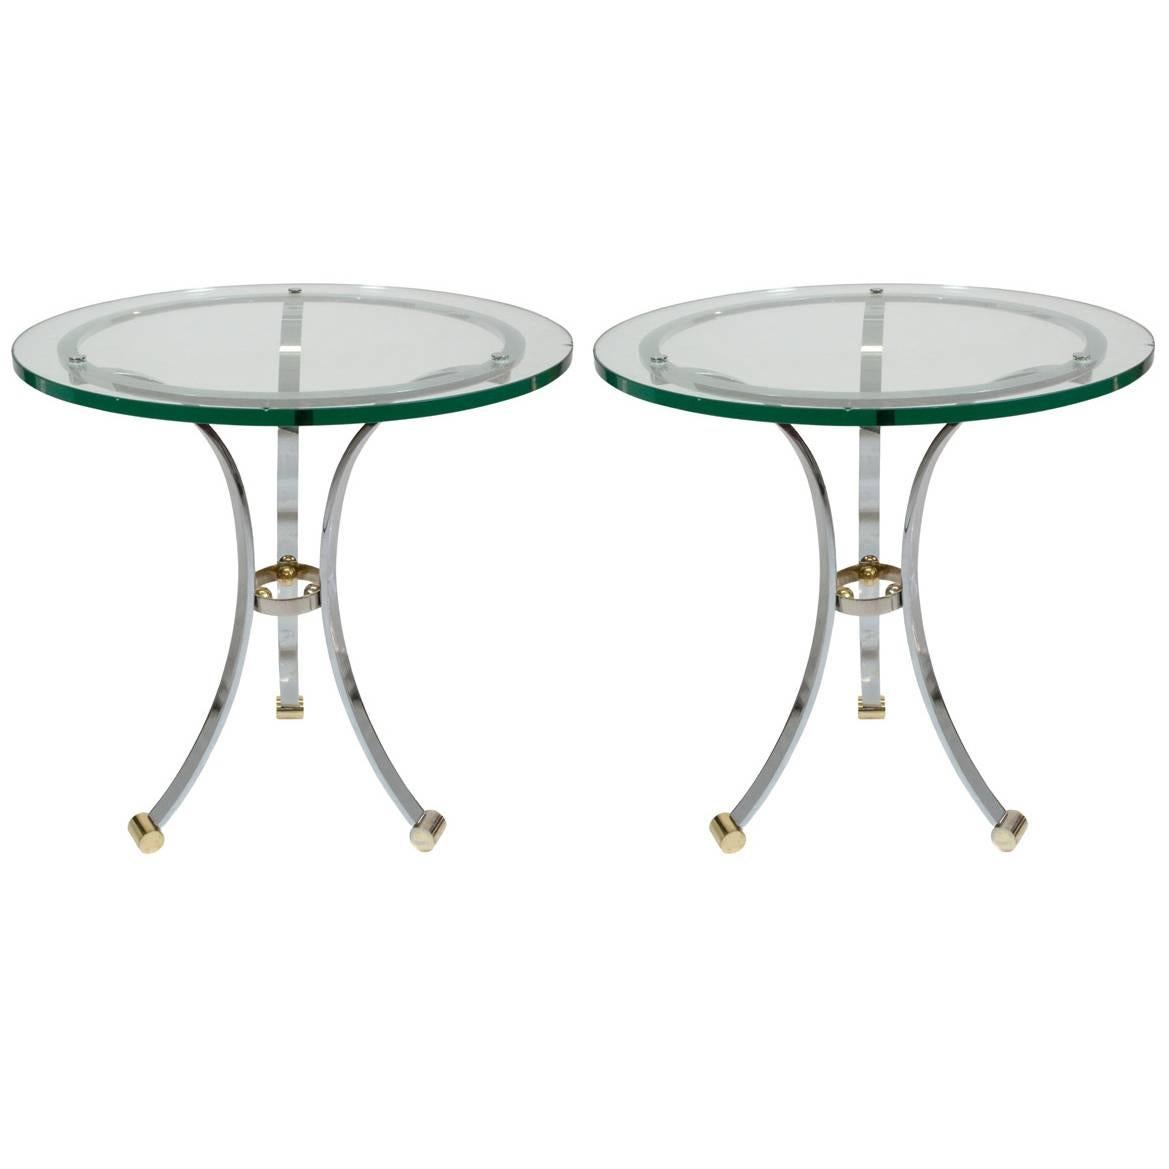 Pair of Chrome and Glass Side Tables by Maison Jansen